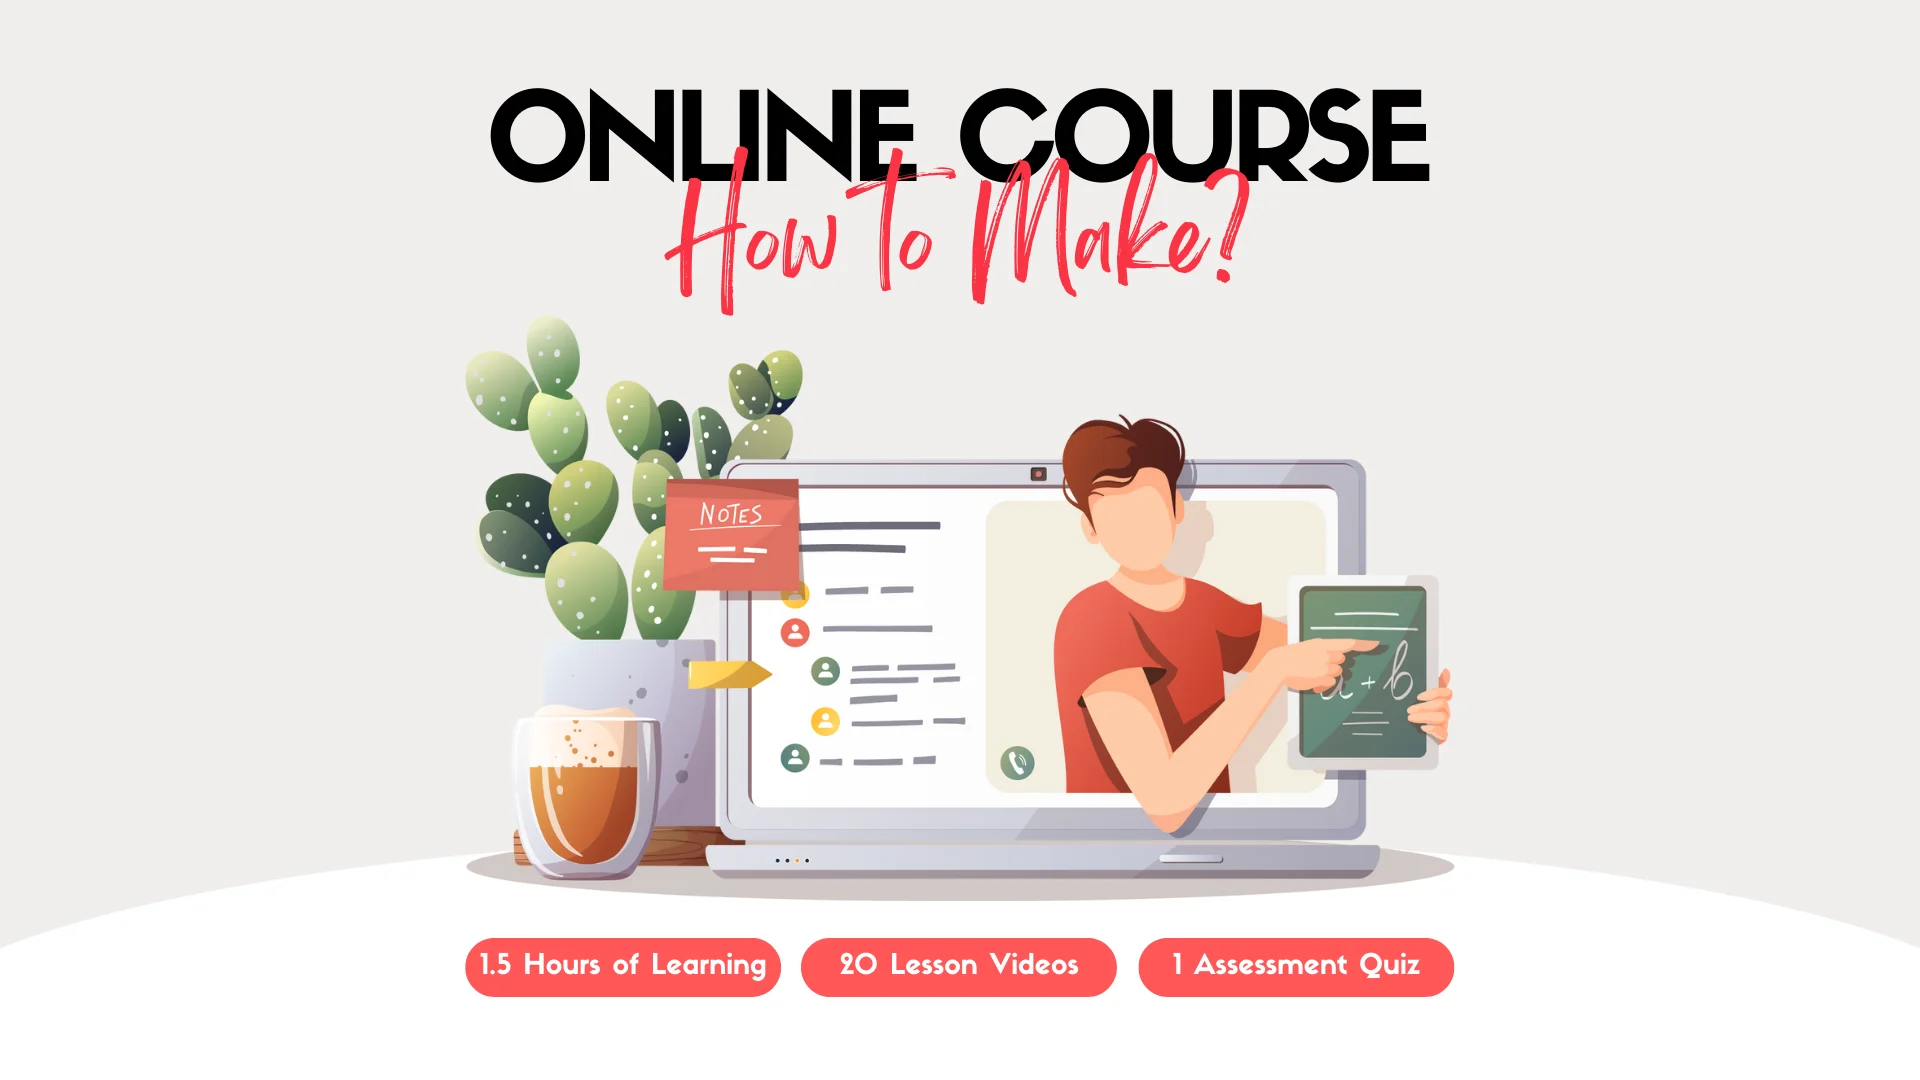 How to Make Online Course Featured Image